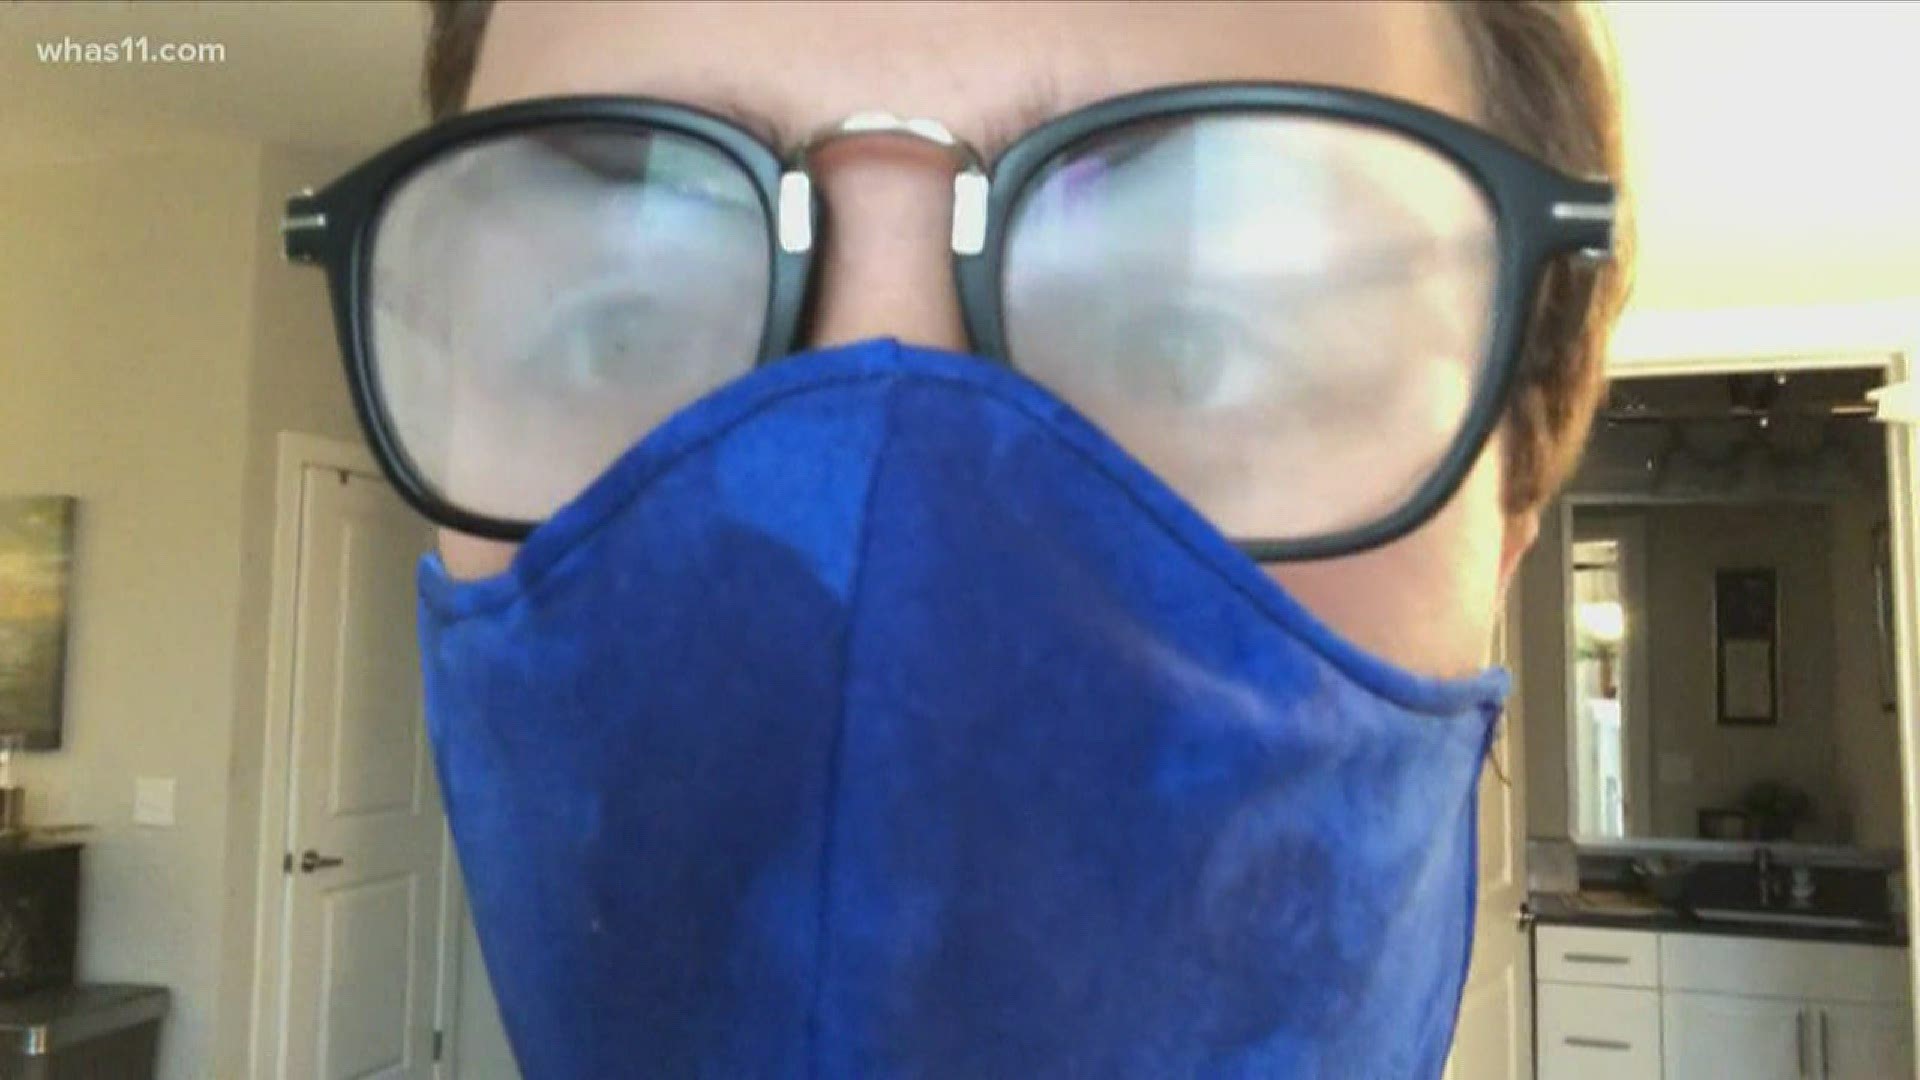 While everyone is encouraged to wear a mask in public, those with glasses might find it particularly difficult.